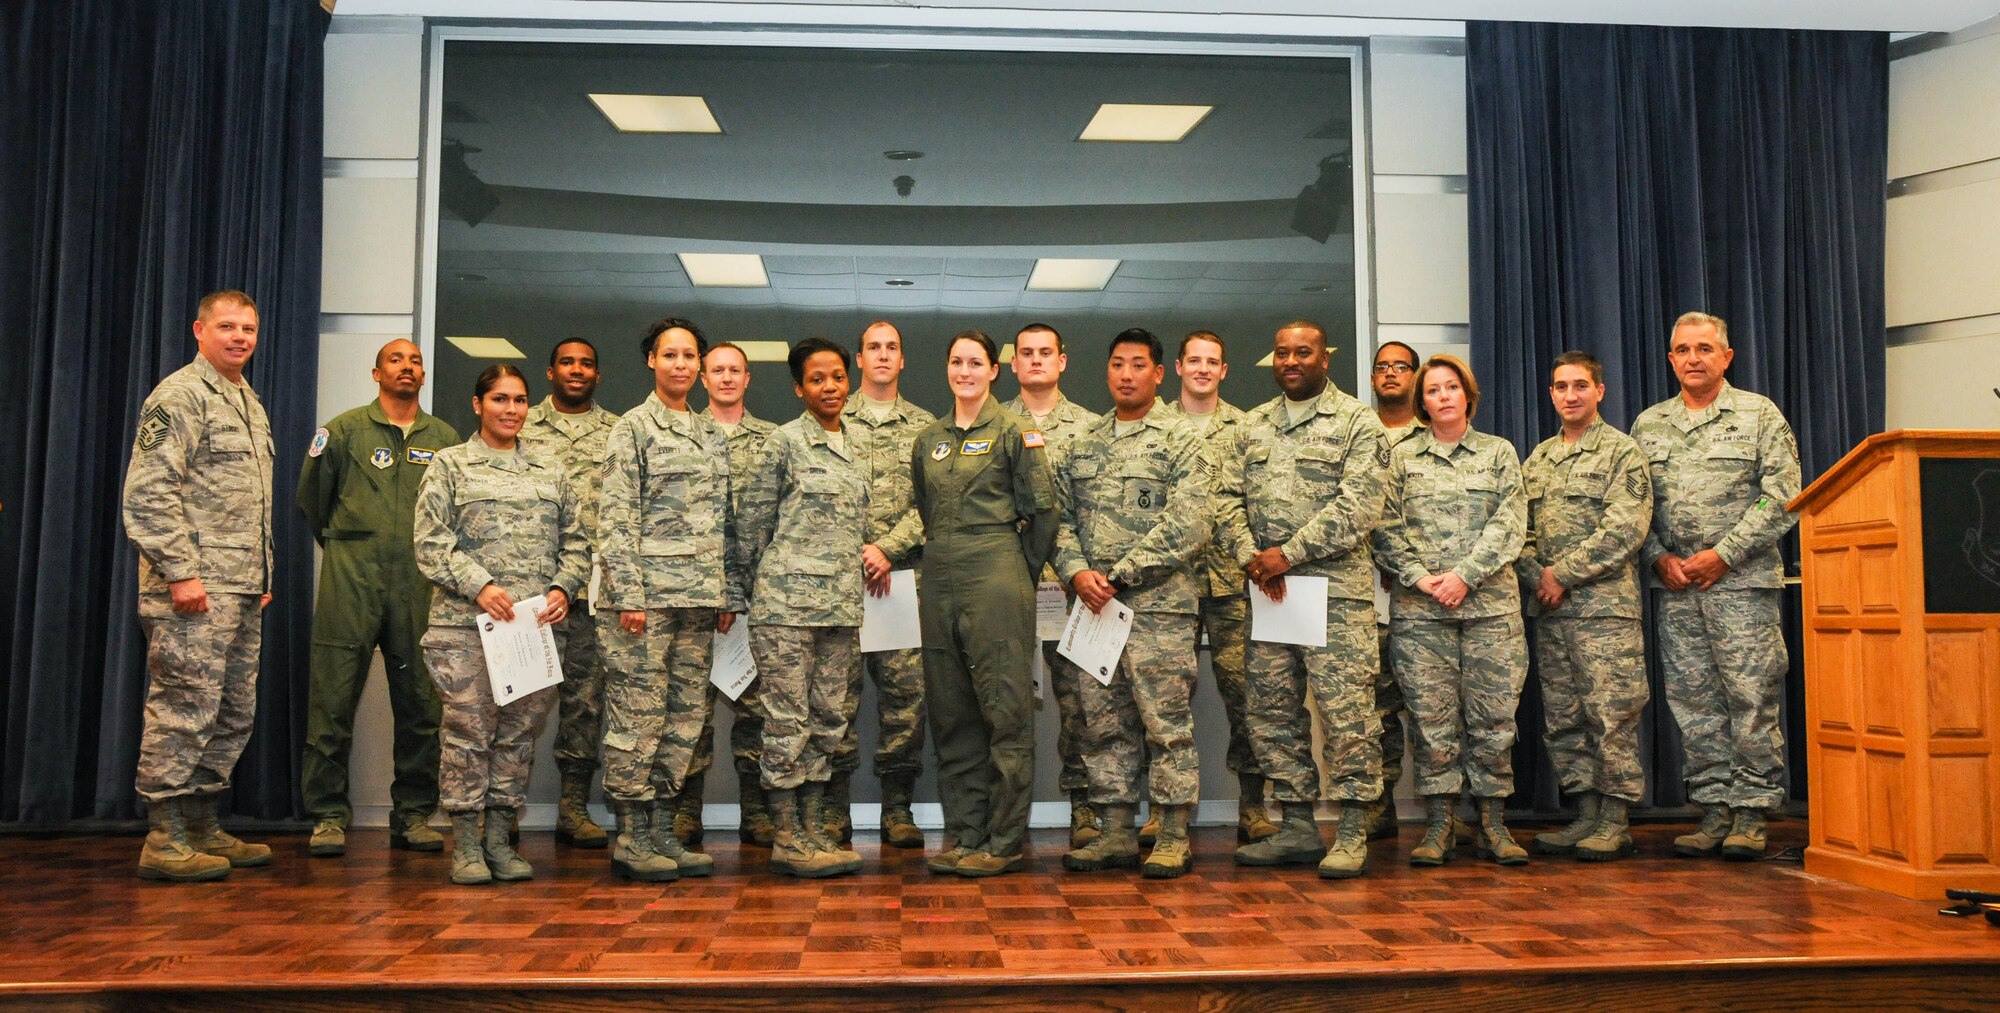 Twenty-one Airmen of the Delaware Air National Guard were recognized as graduates of the Community College of the Air Force Class of October 2013 at a ceremony held Nov. 3, 2013, at Delaware ANG Headquarters, New Castle ANG Base, Del. Pictured are 15 of the 21 graduates flanked by the two command chiefs who assisted in the presentation of certificates. From left (front row): Chief Master Sgt. Stephen Stinsky, state command chief, Delaware ANG, Staff Sgt. Shirley Hunsiker, Tech. Sgt. Zaquette Everett, Master Sgt. (now 2nd Lt.) Kemeshia Greene, Tech. Sgt. Victoria Arnold, Staff Sgt. Richard Bergante, Master Sgt. Ronald Sudler, Master Sgt. Regina Minzer, Master Sgt. Shane Hummel and Chief Master Sgt. Henry Rome, wing command chief, 166th Airlift Wing. From left (back row): Tech. Sgt. Alvin Henson, Staff Sgt. Jomarr Hatten, Staff Sgt. Wayne Borrmann, Tech. Sgt. Jon Goe, Staff Sgt. Christopher Jackowski, Senior Airman Michael Krantz and Master Sgt. Sean Henderson. (U.S. Air National Guard photo by Tech. Sgt. Robin Meredith).